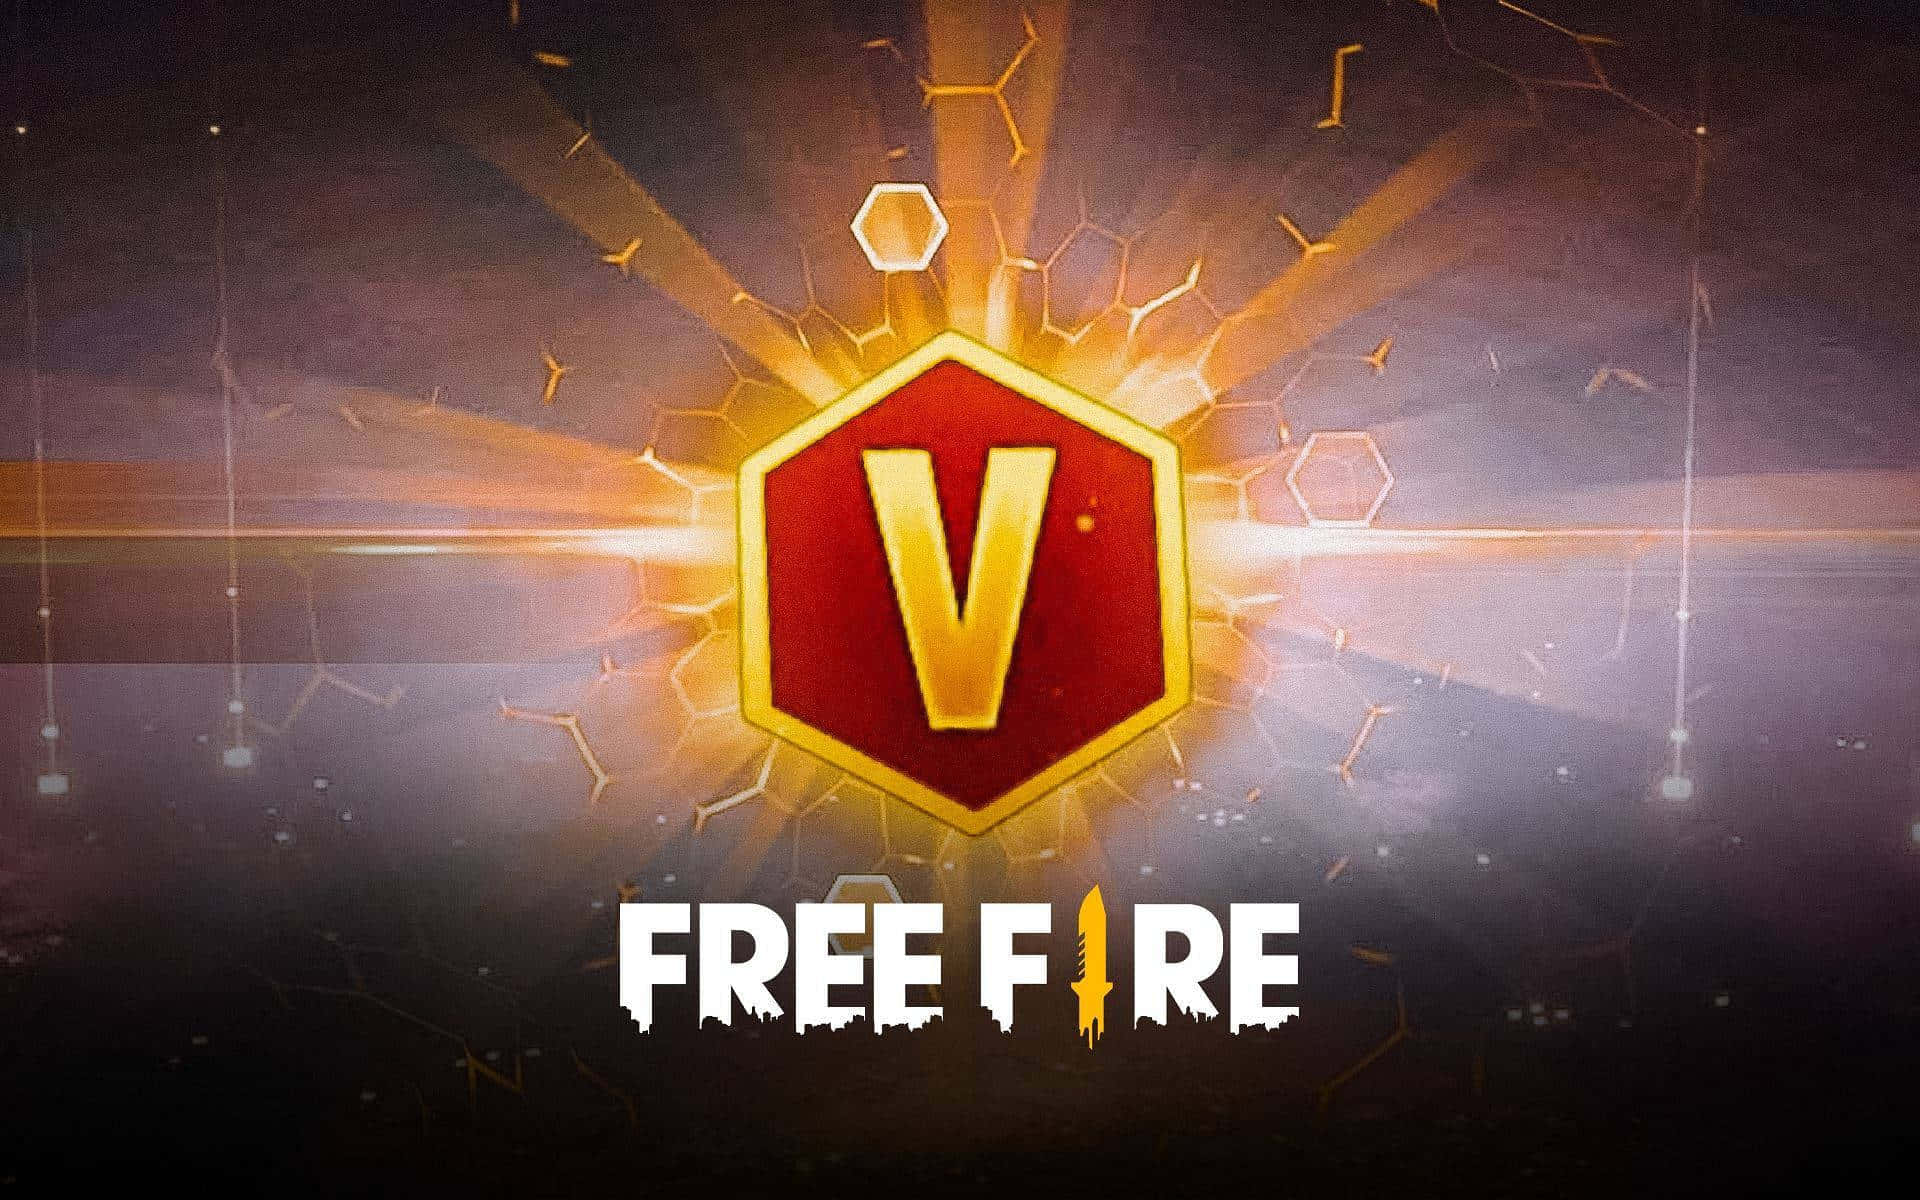 Epic Battle of Flames - The Fire Logo of Free Fire